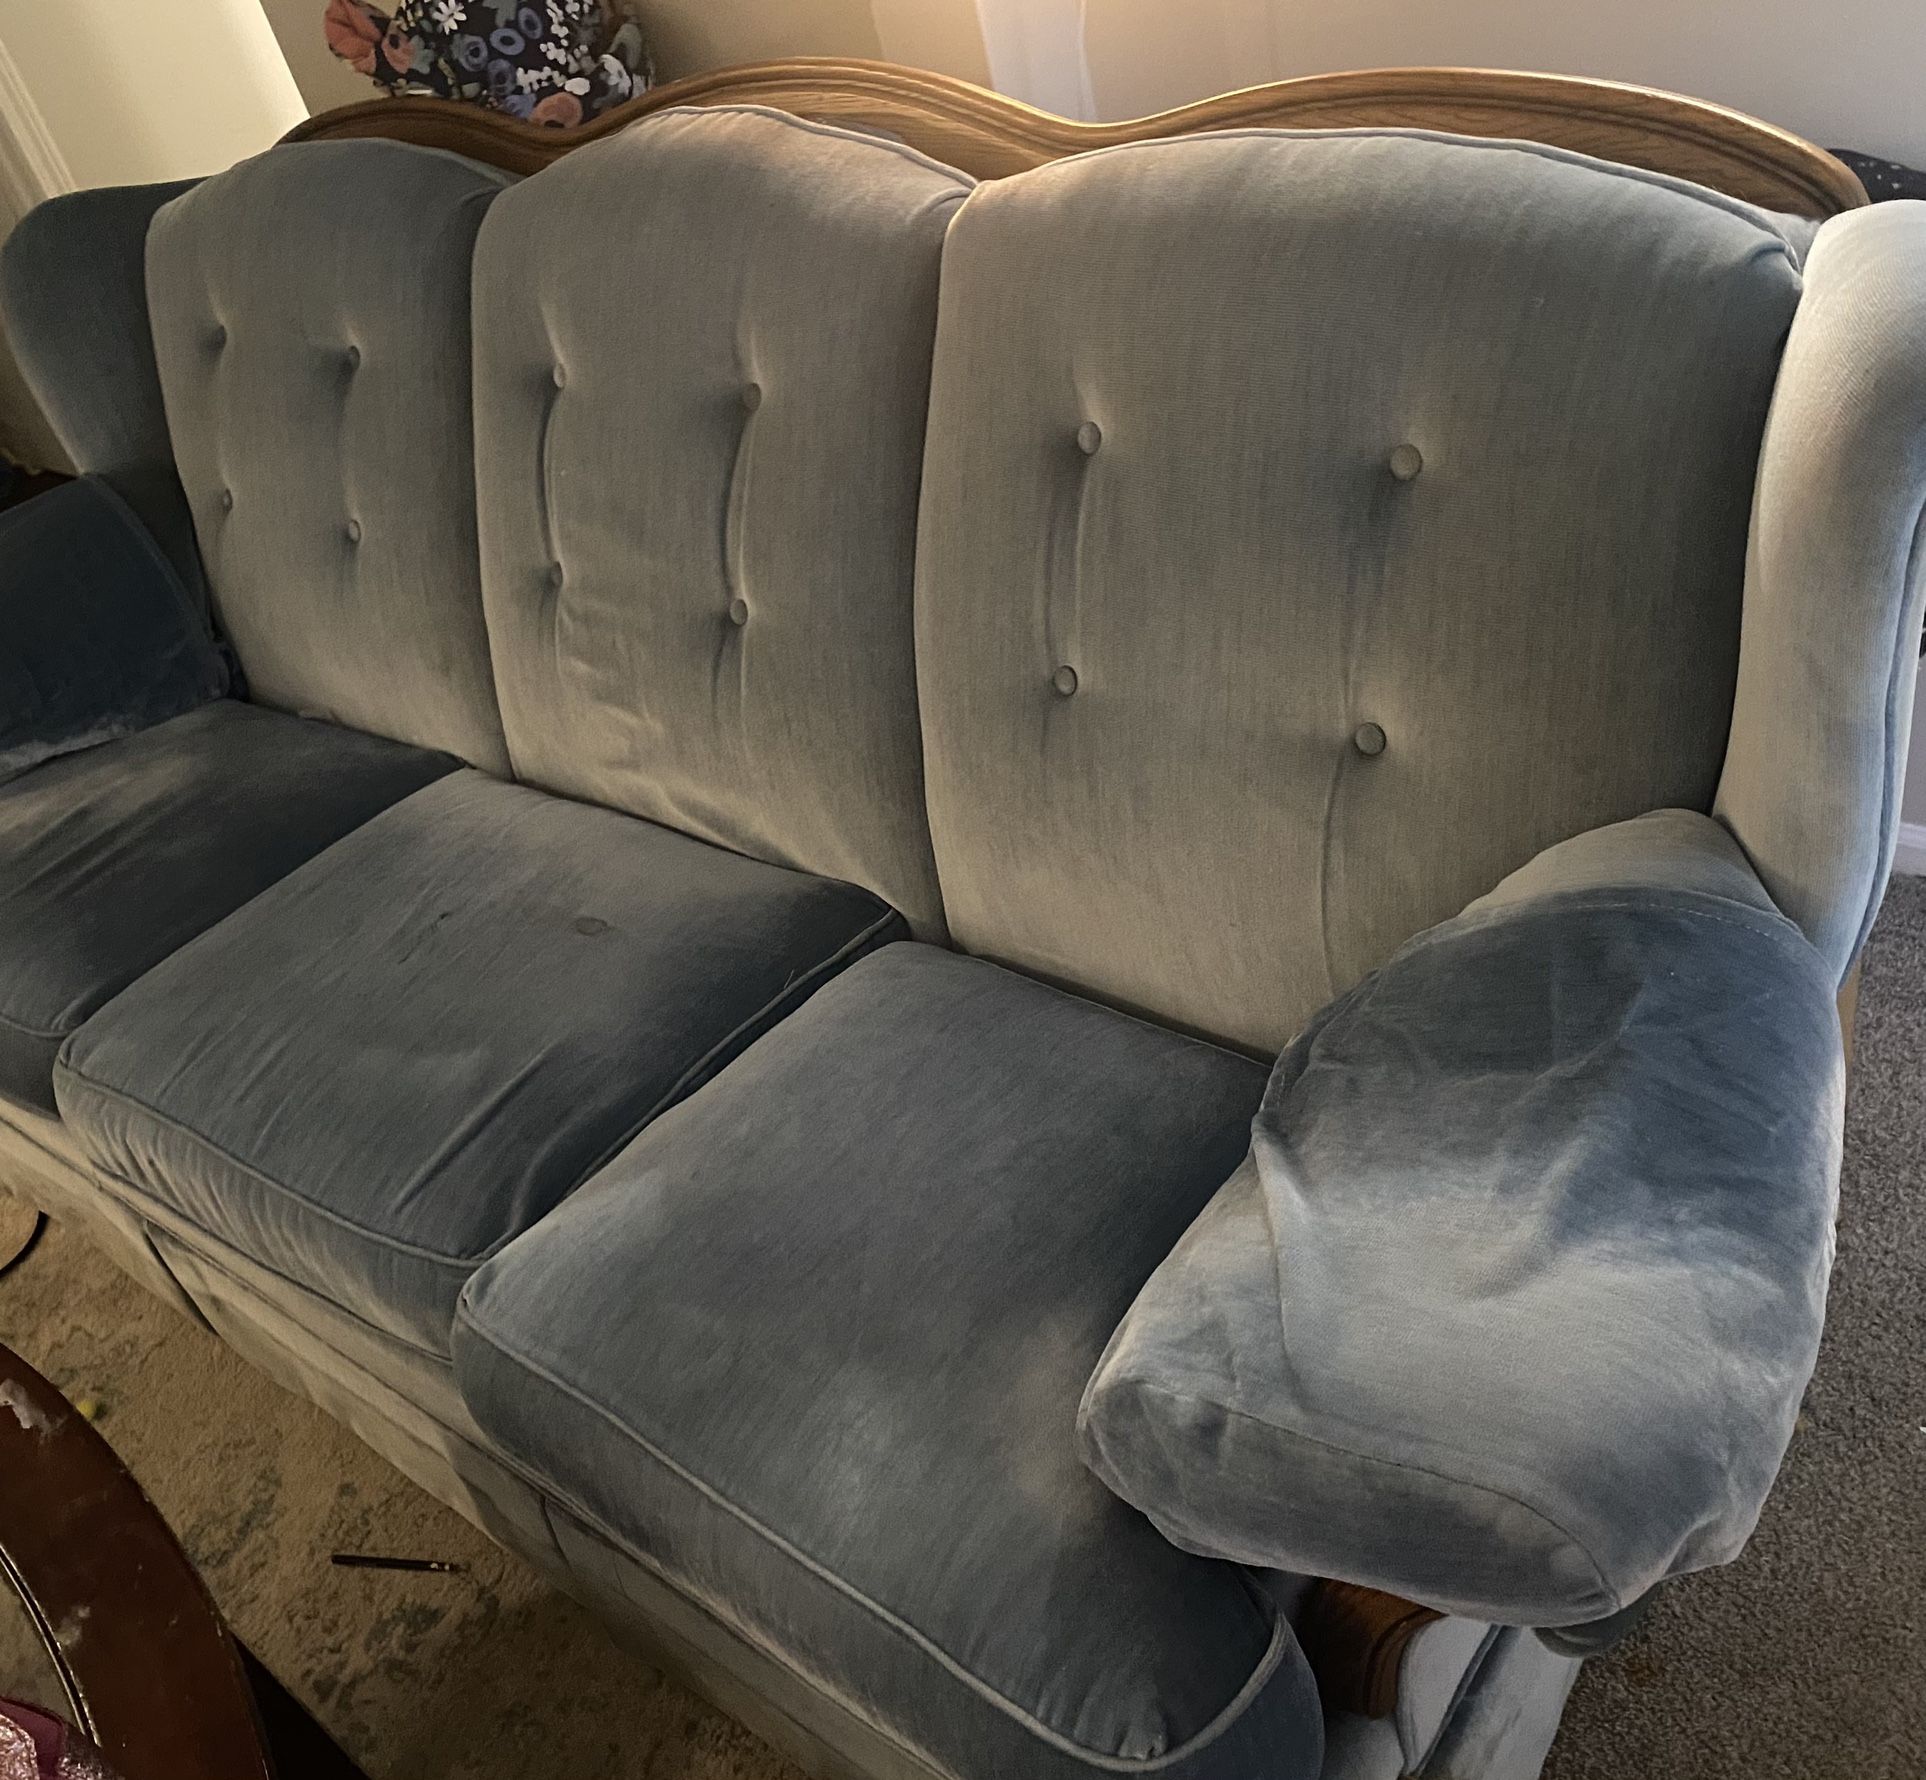 FREE FLEX-STEEL LIVING ROOM CHAIR AND COUCH SET